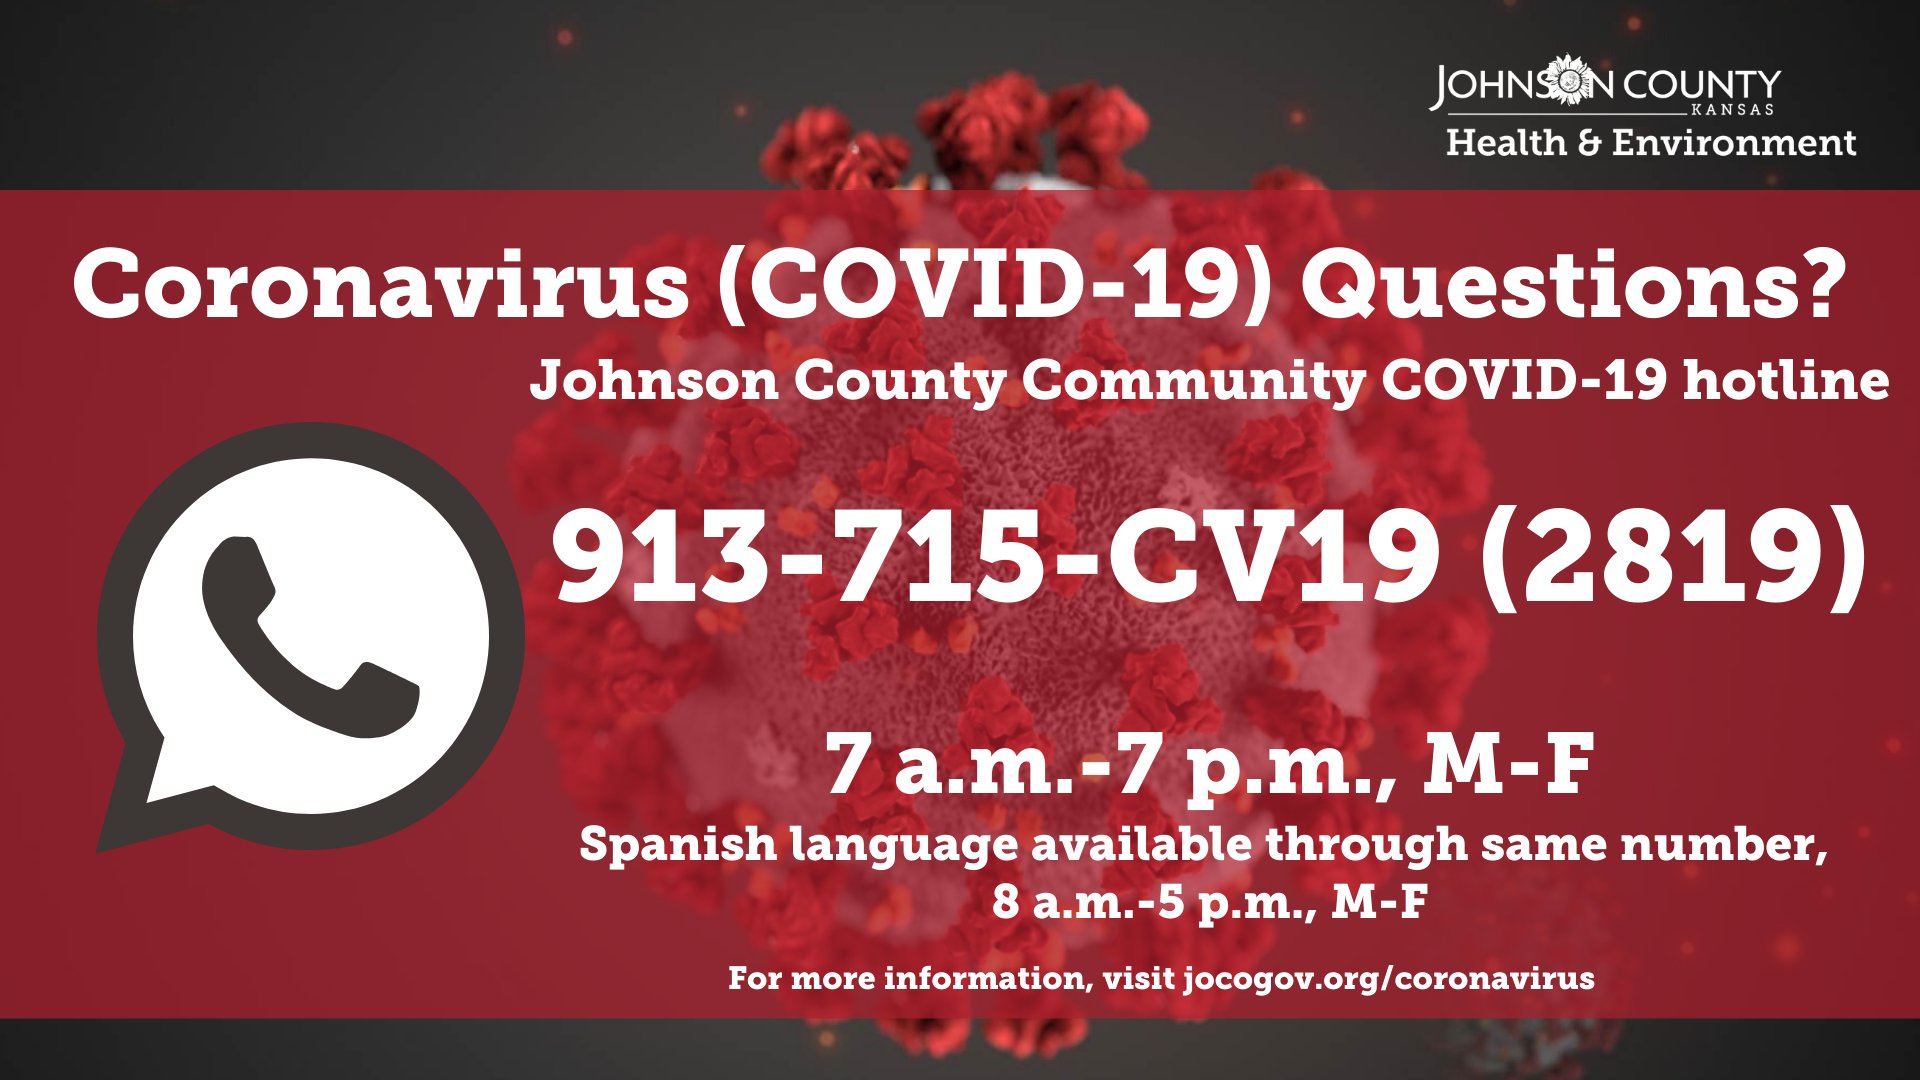 Johnson County Kan Questions About Coronavirus We Have A Covid19 Hotline For The Public To Ask Questions Calls Being Answered By School Nurses From Johnson County Schools Call 913 715 Cv19 913 715 2819